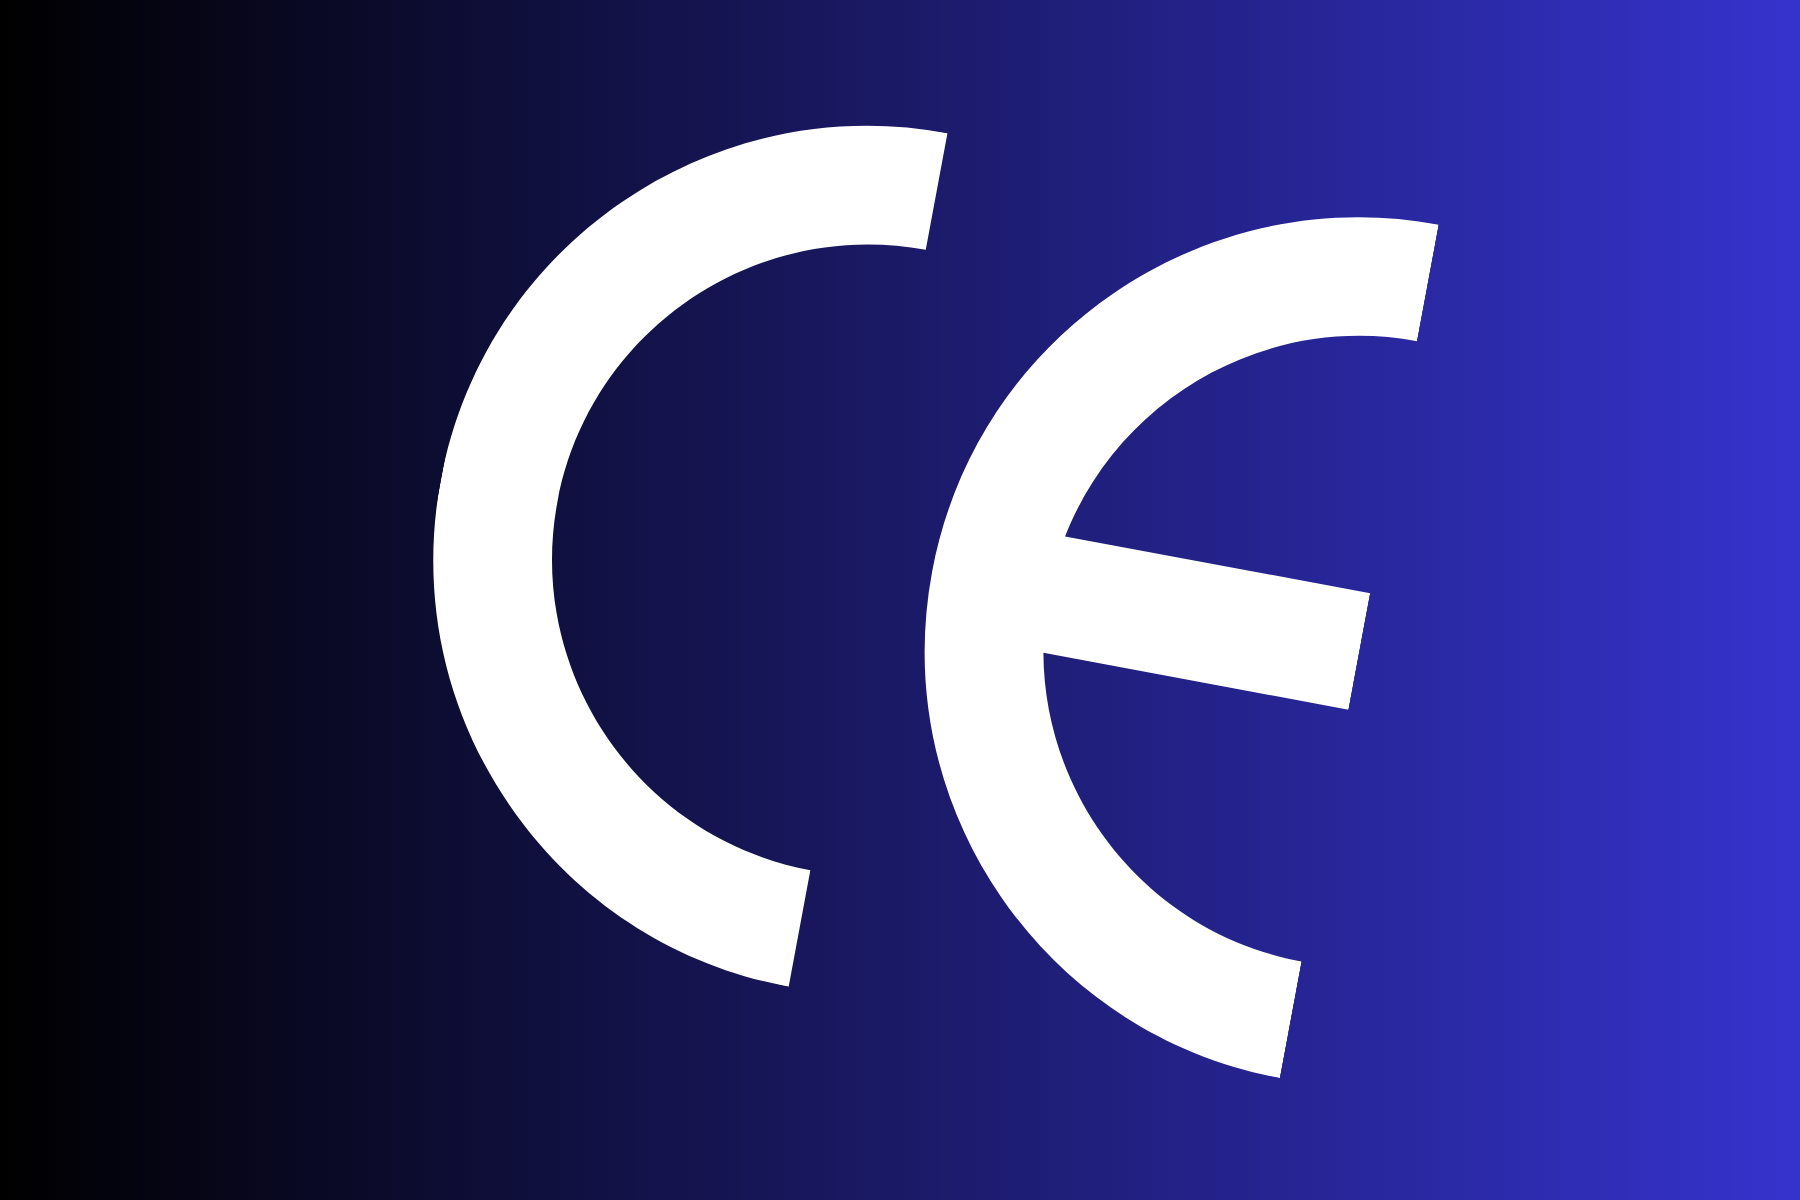 CE Marking: What is it and does my business need one? | West Virginia ...